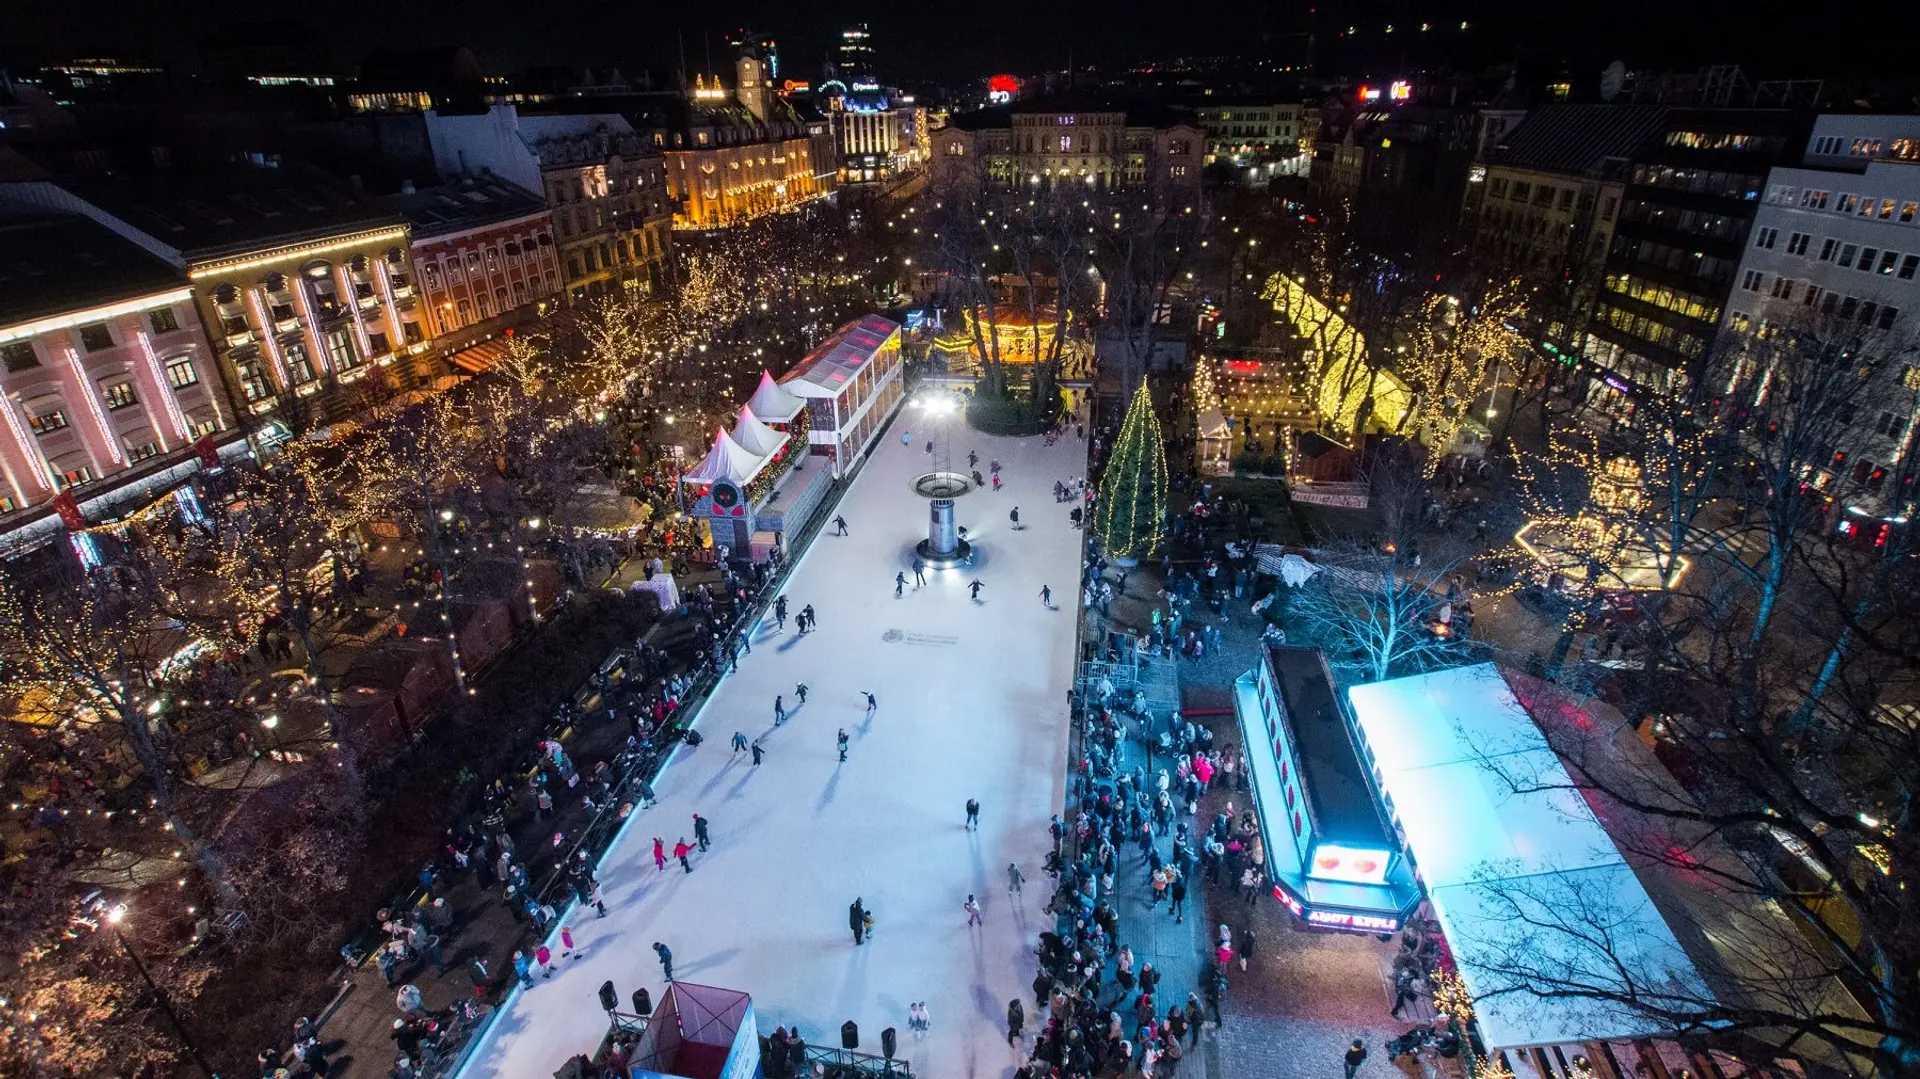 Jul i Winterland Christmas market in Oslo, Norway, one of the best Christmas markets in Europe 